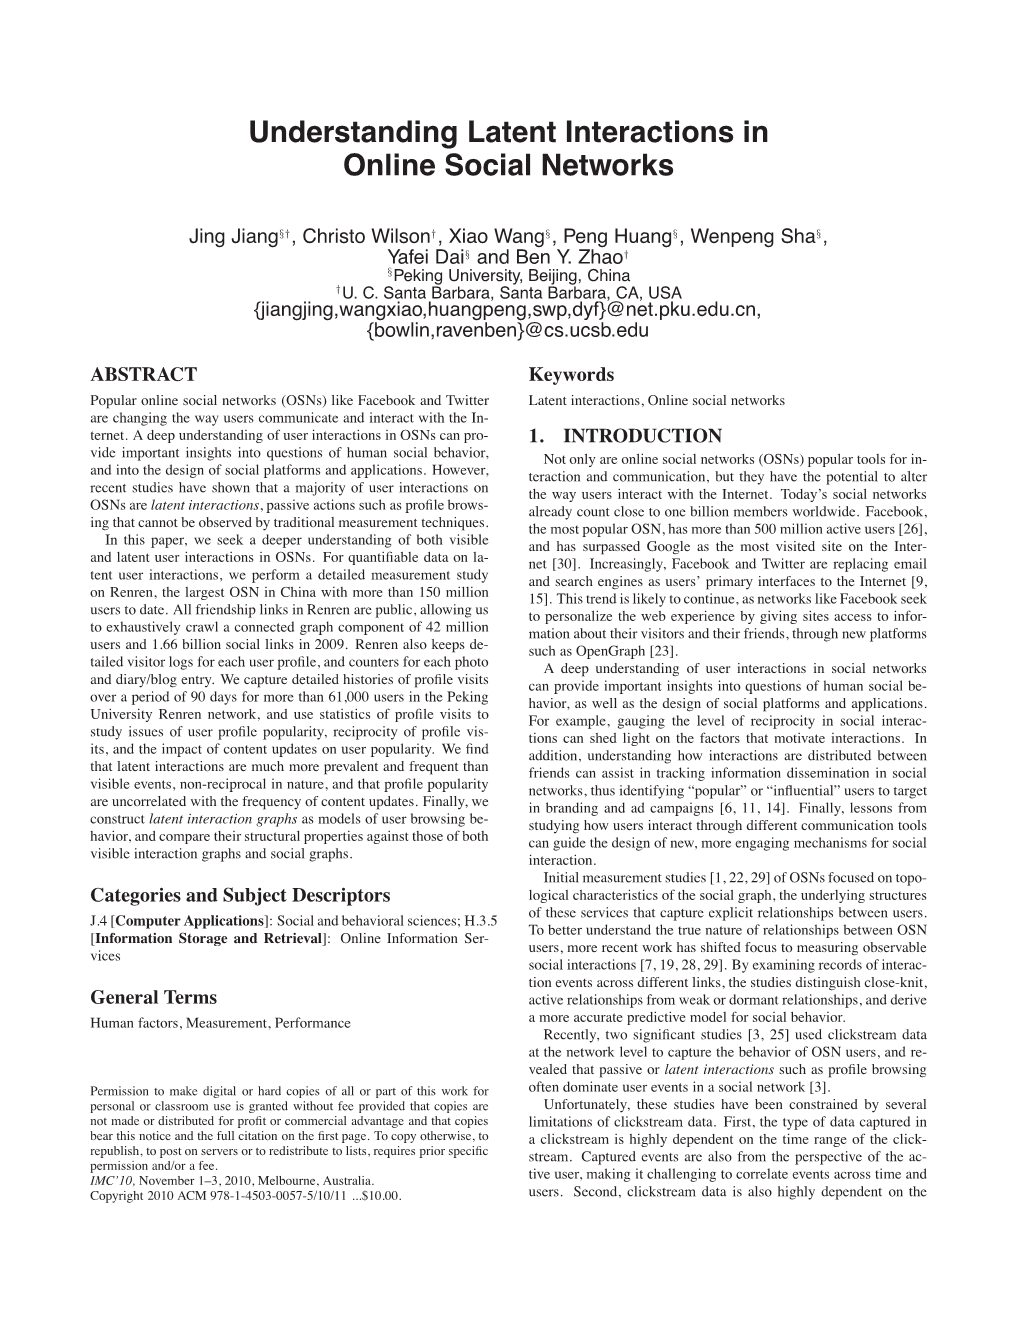 Understanding Latent Interactions in Online Social Networks